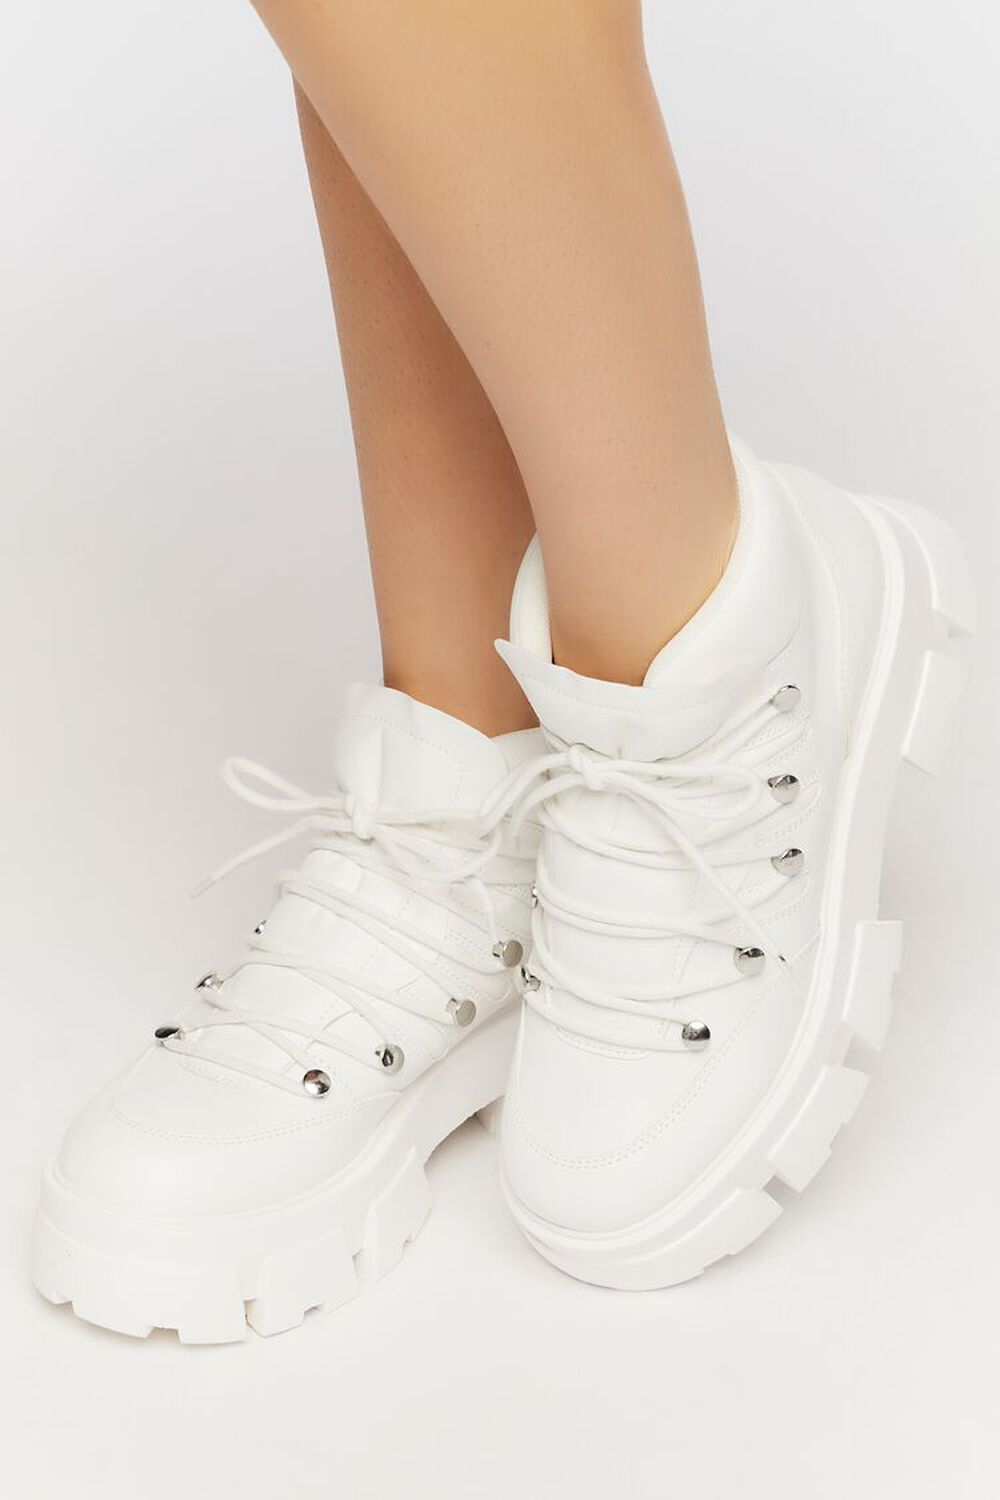 WHITE Lace-Up Lug Sole Ankle Booties, image 1